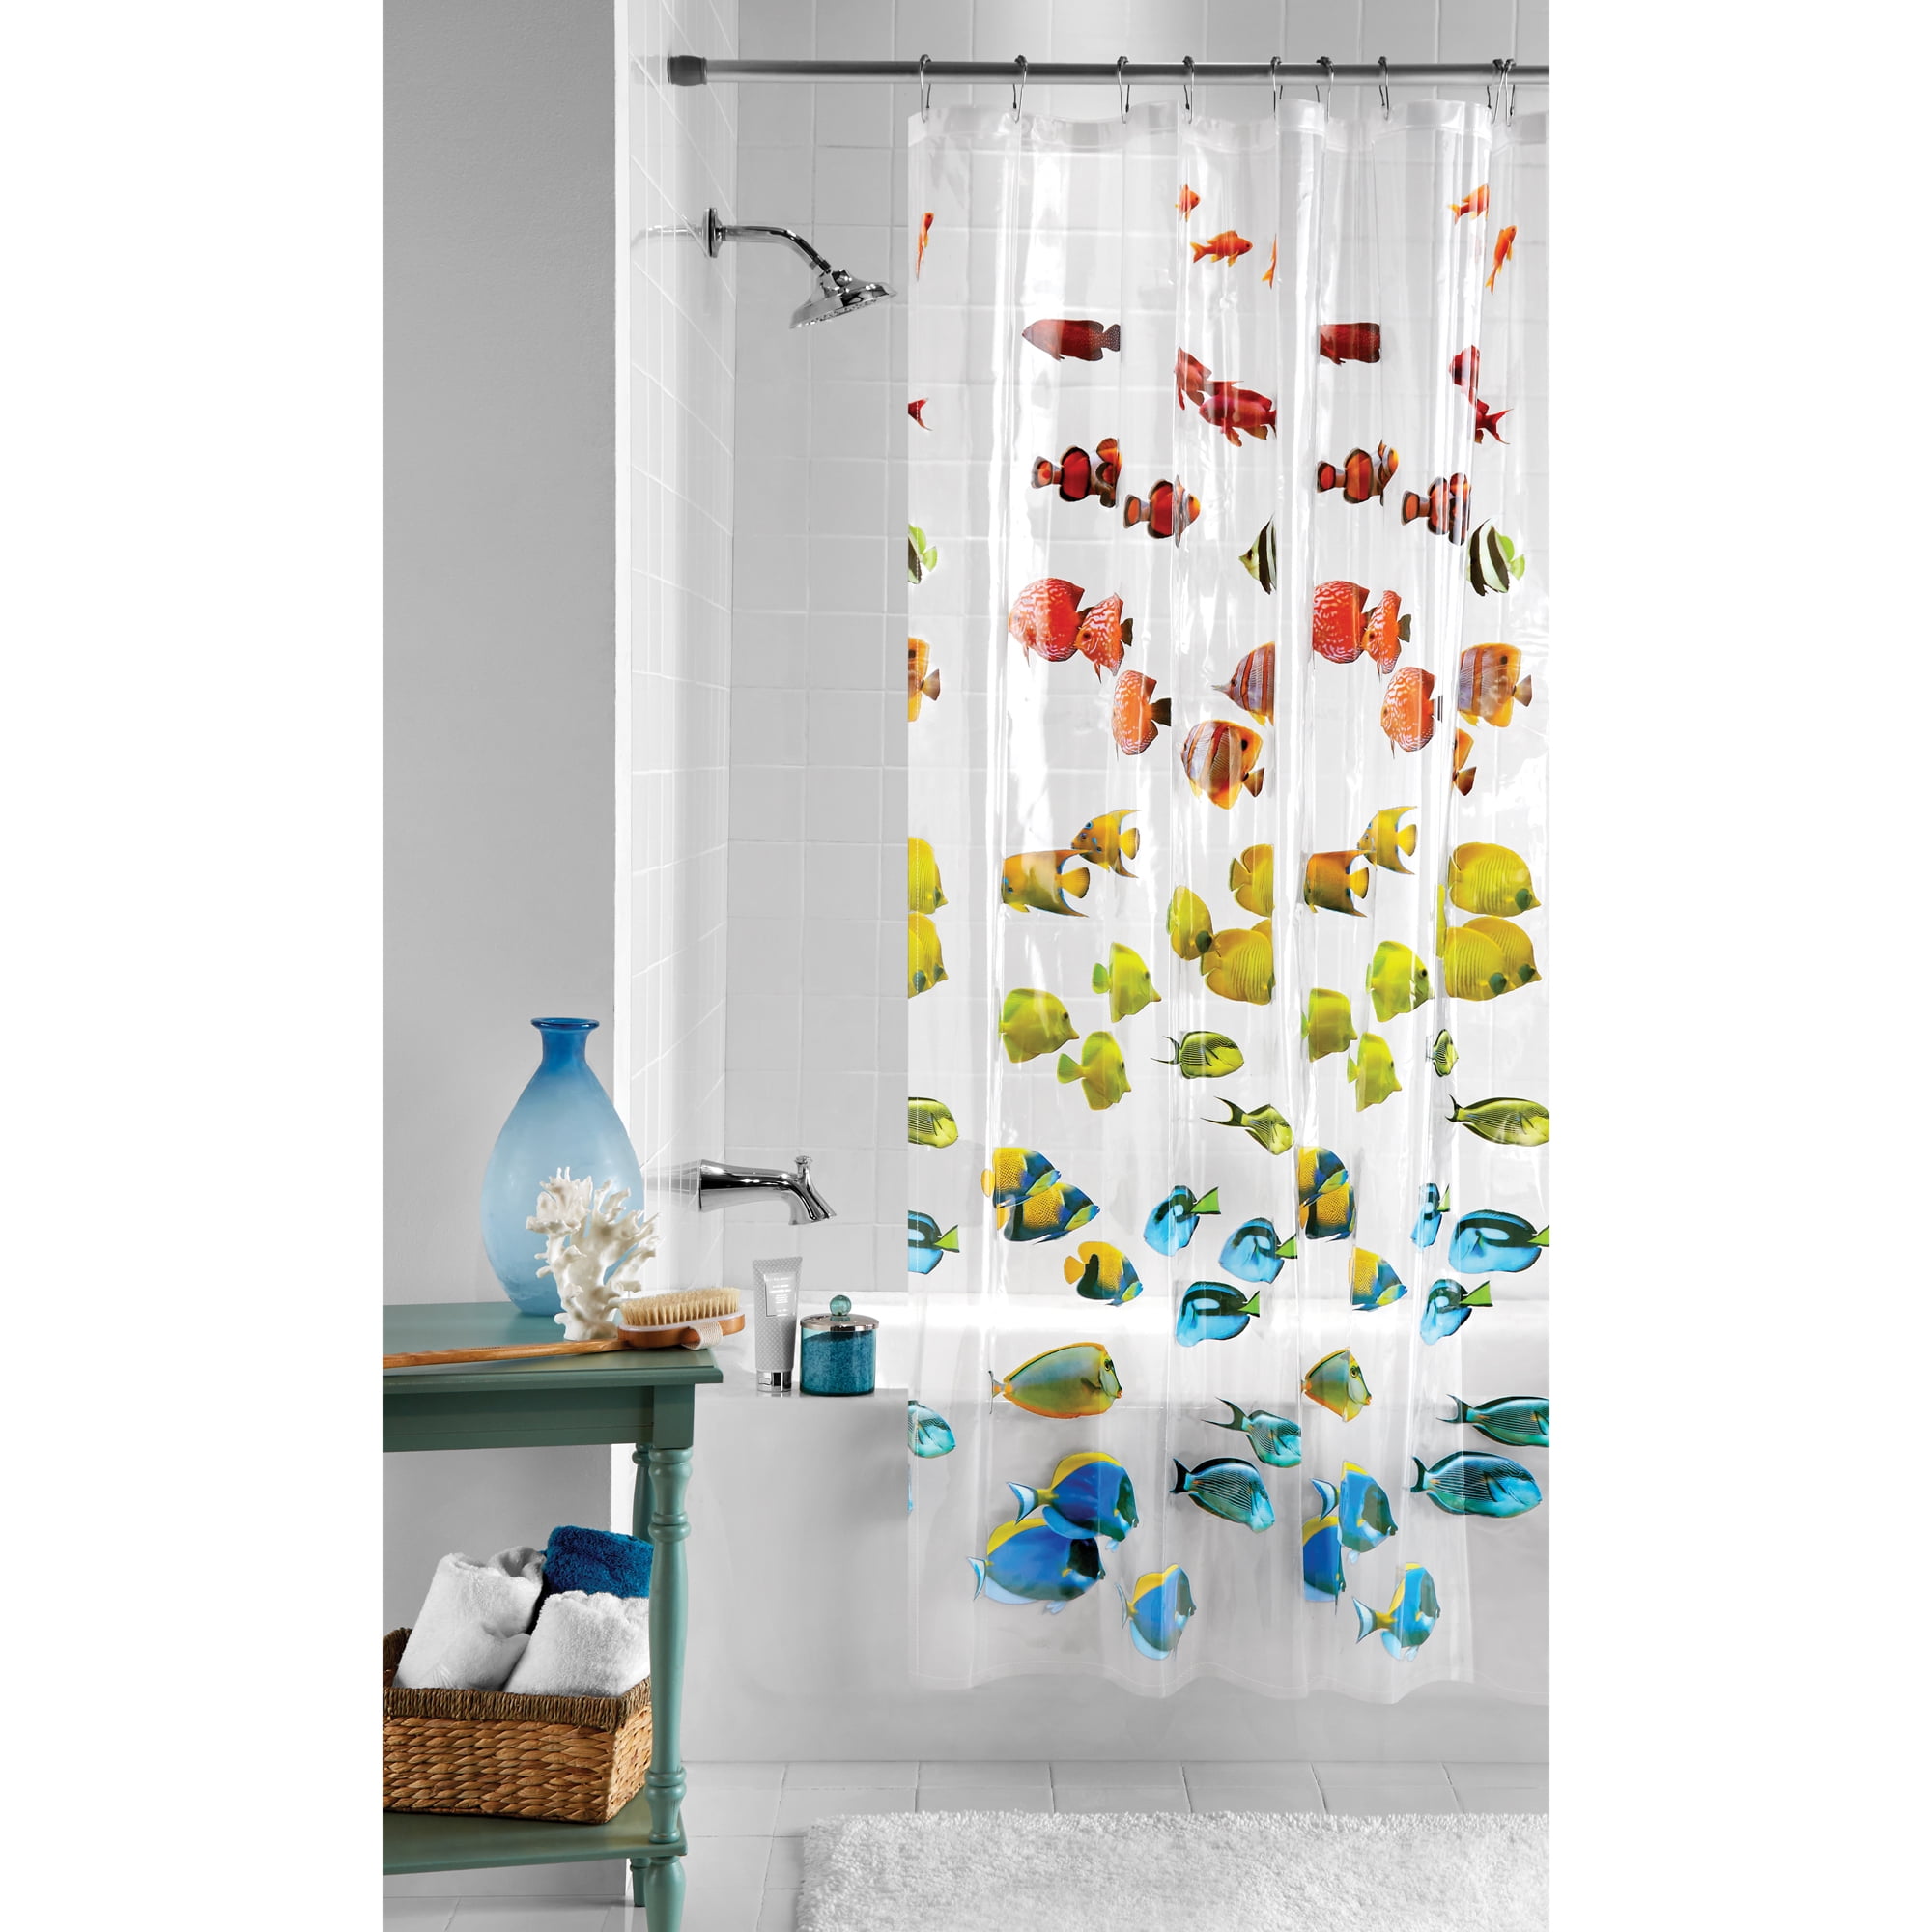 Details about   Shower Curtain PEVA 72" x 72" Multi-Color Triangle Pattern Shower Curtain Liner 